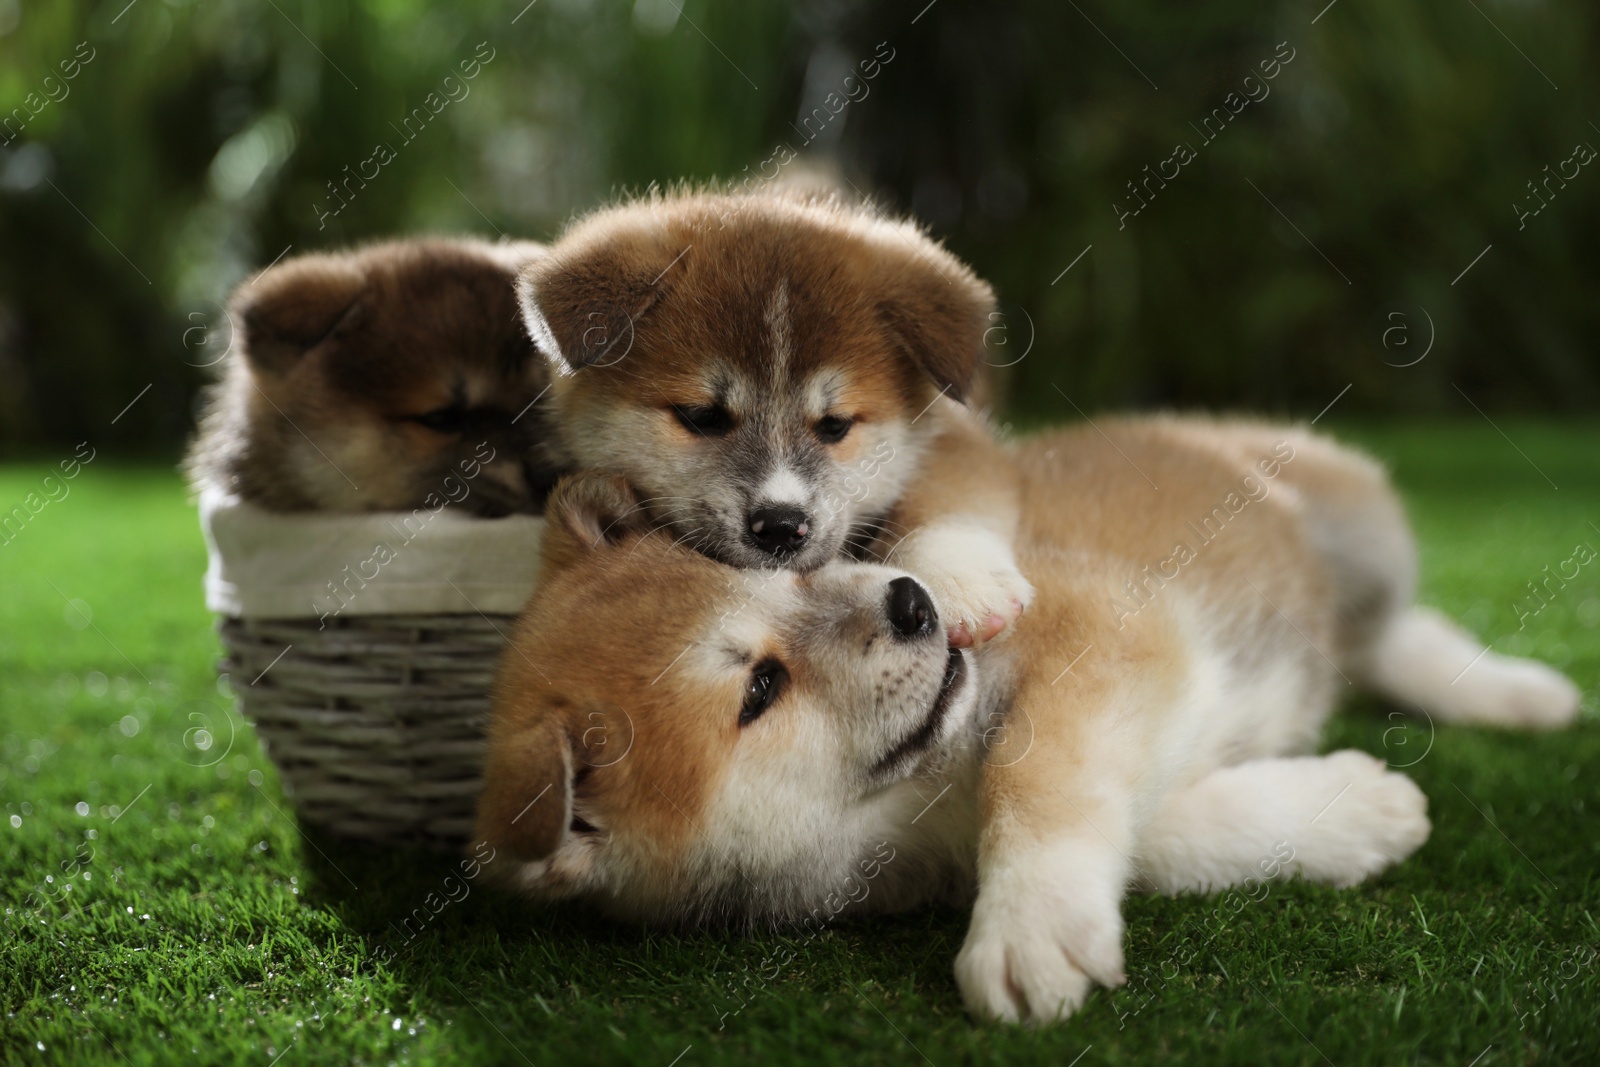 Photo of Cute Akita Inu puppies on green grass outdoors